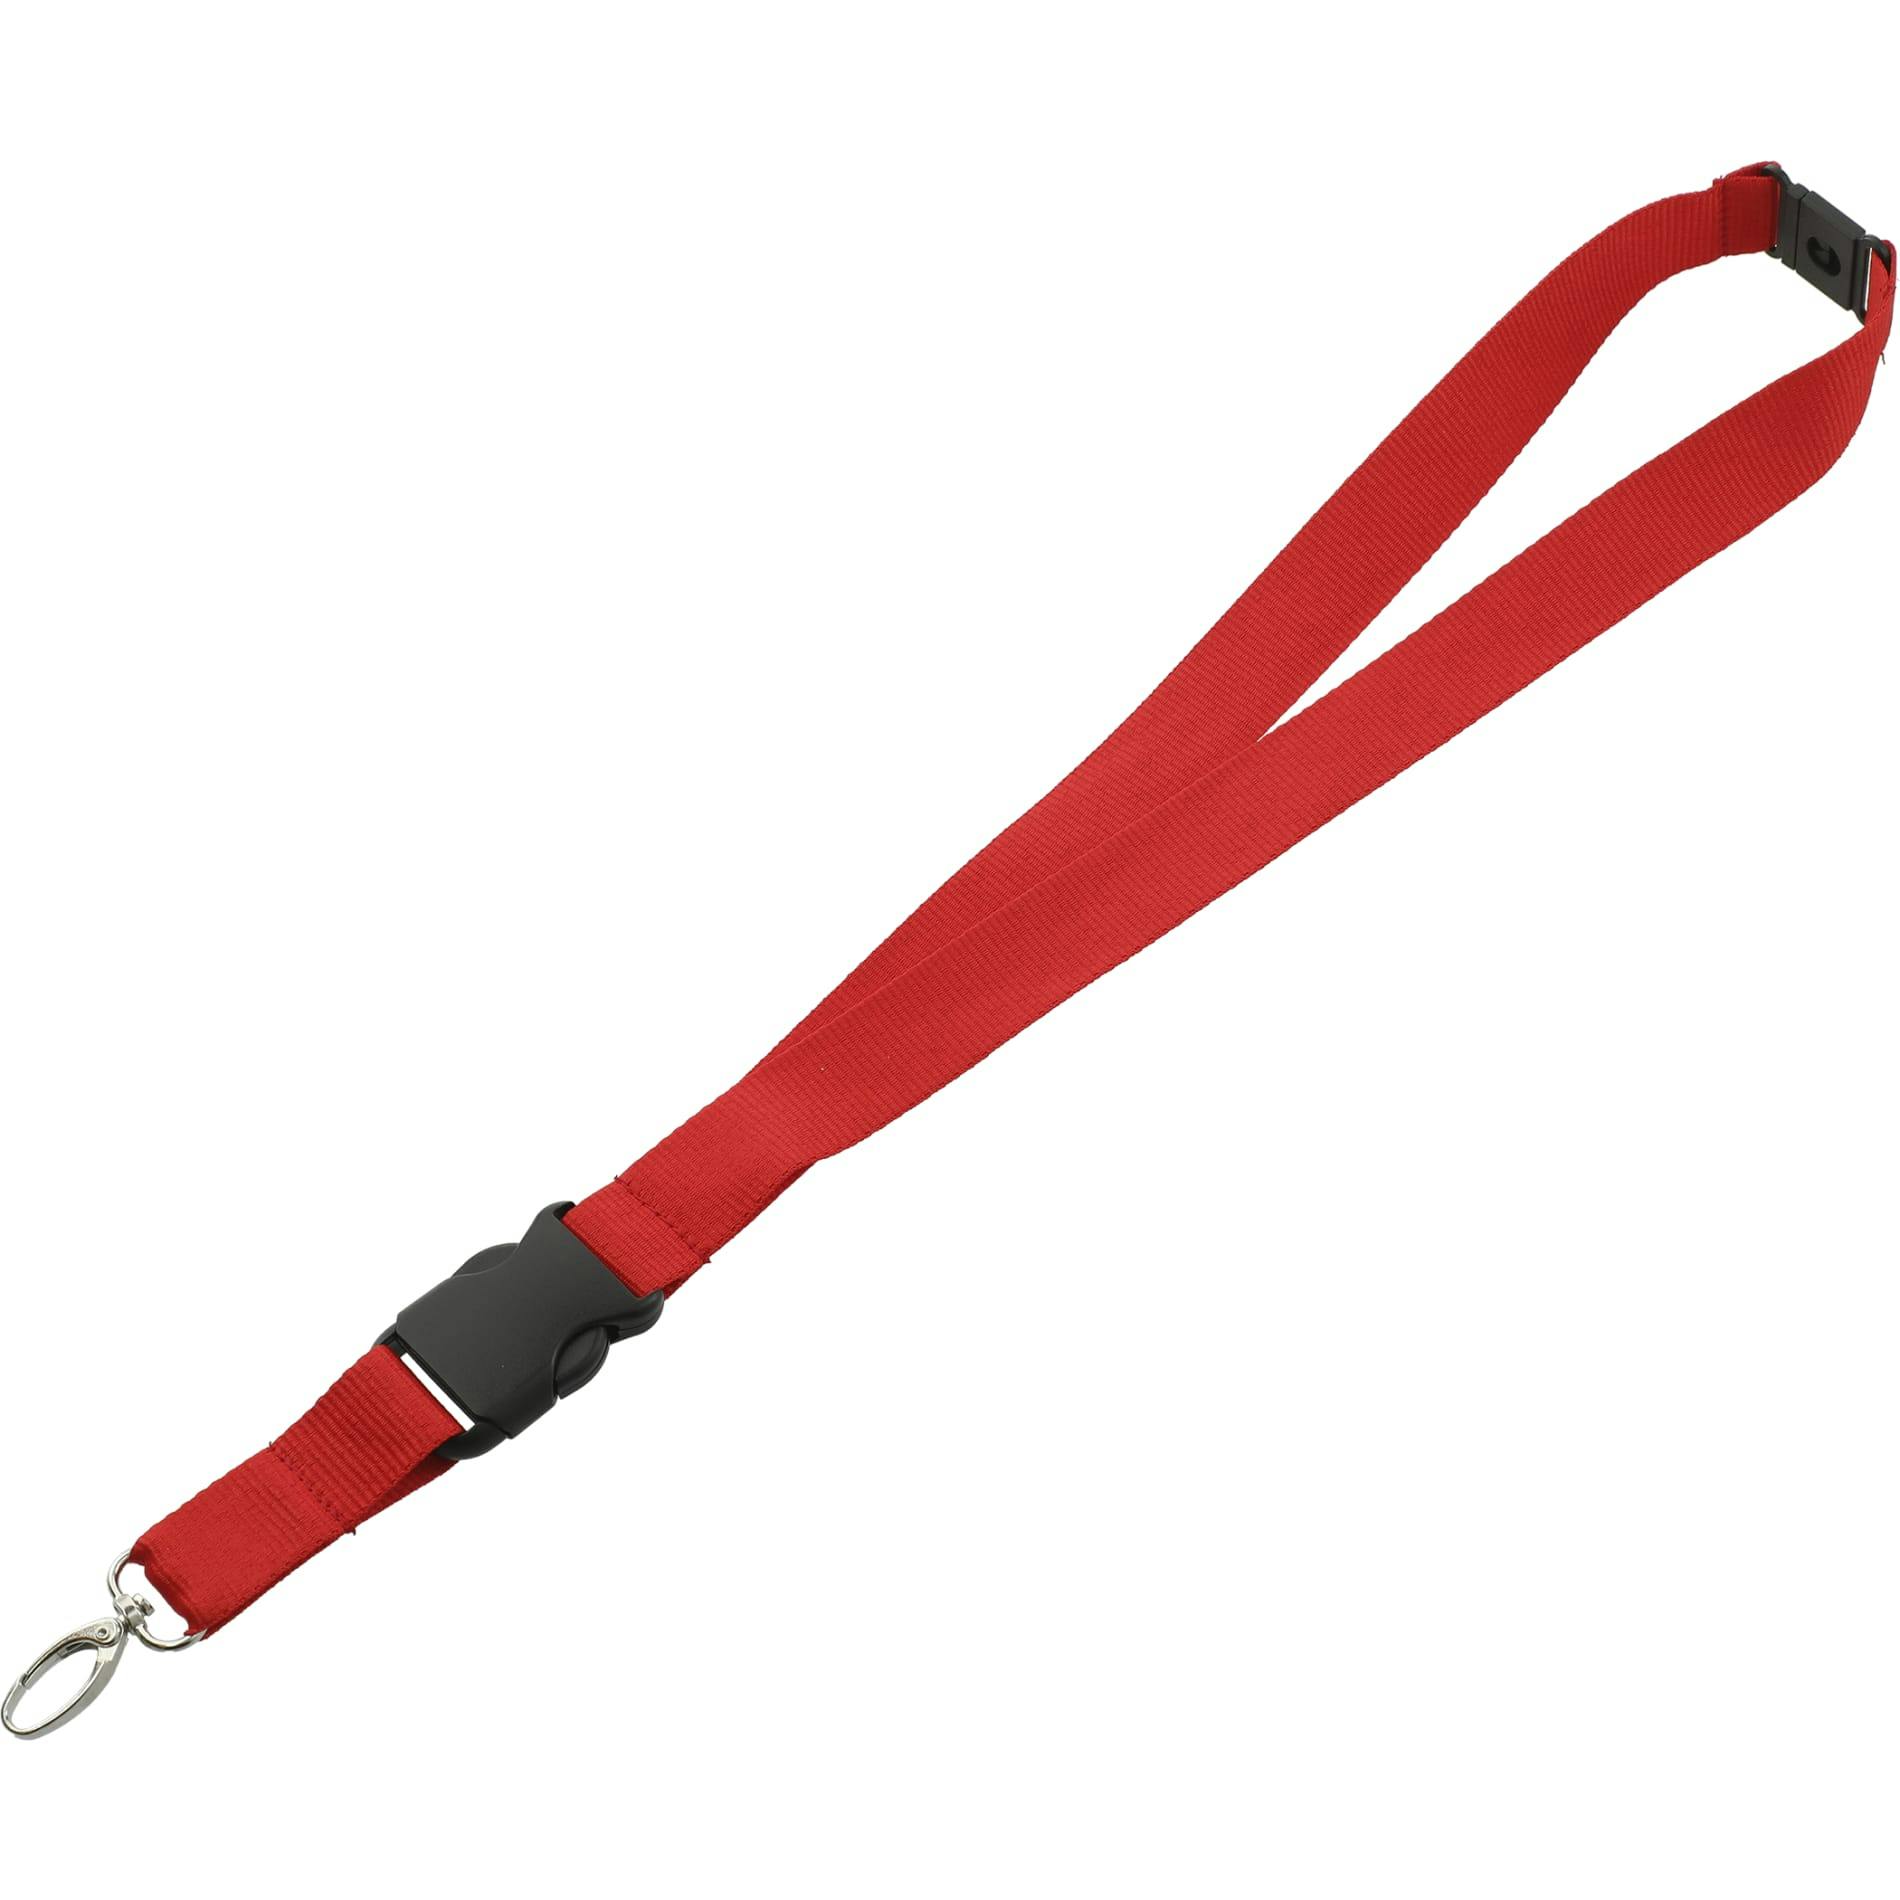 Hang In There Lanyard - additional Image 2